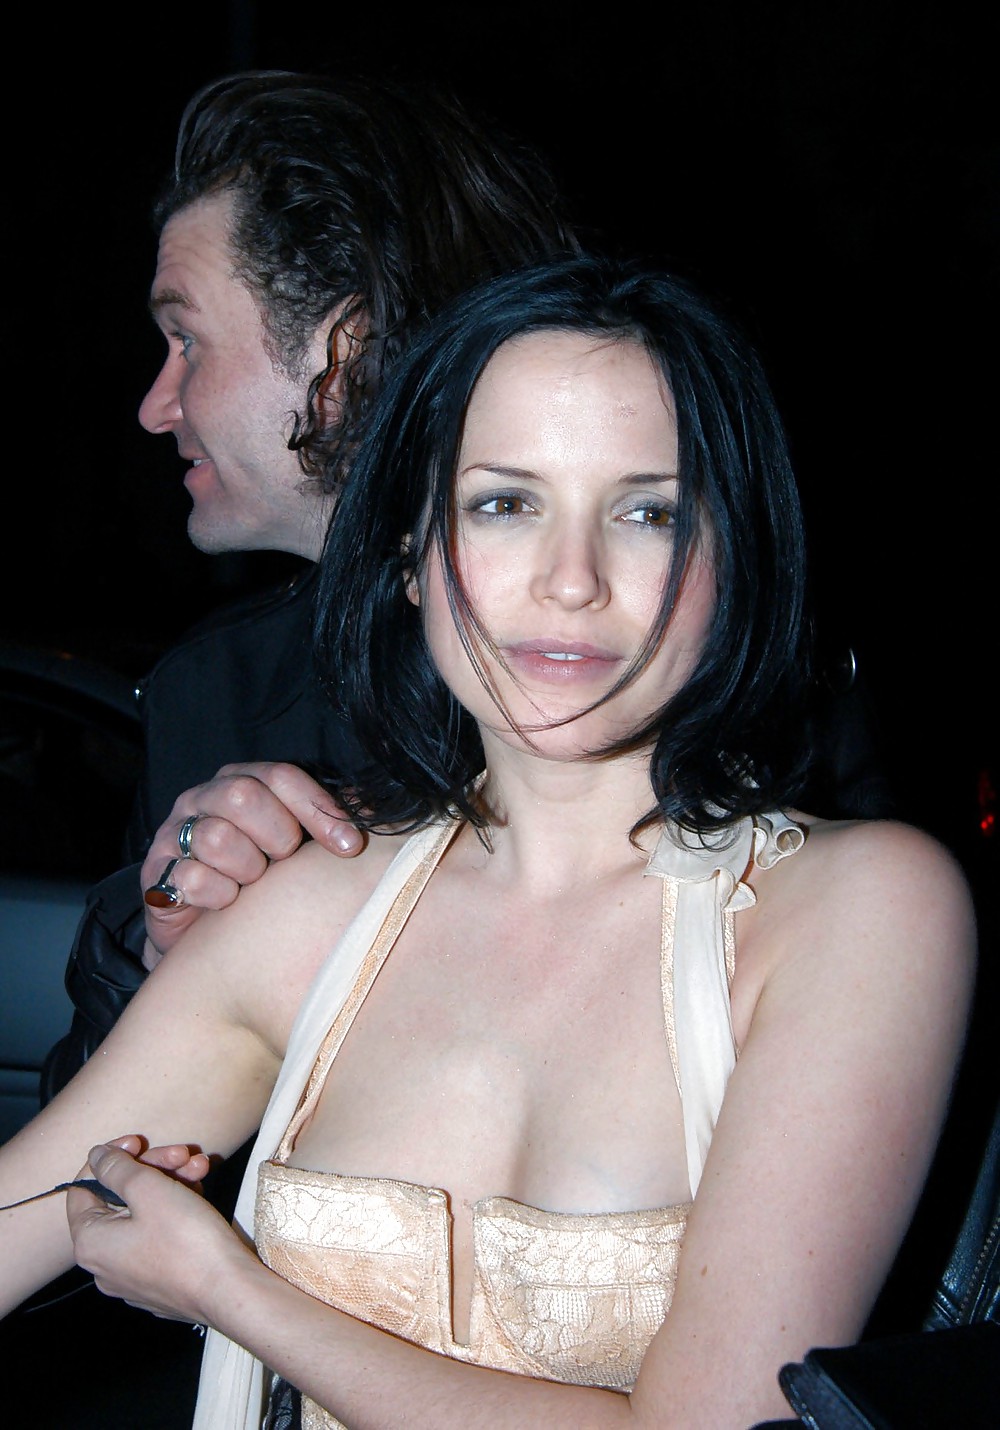 Singer andrea corr, oops, pokies, seethrough+other hot pics
 #36341848